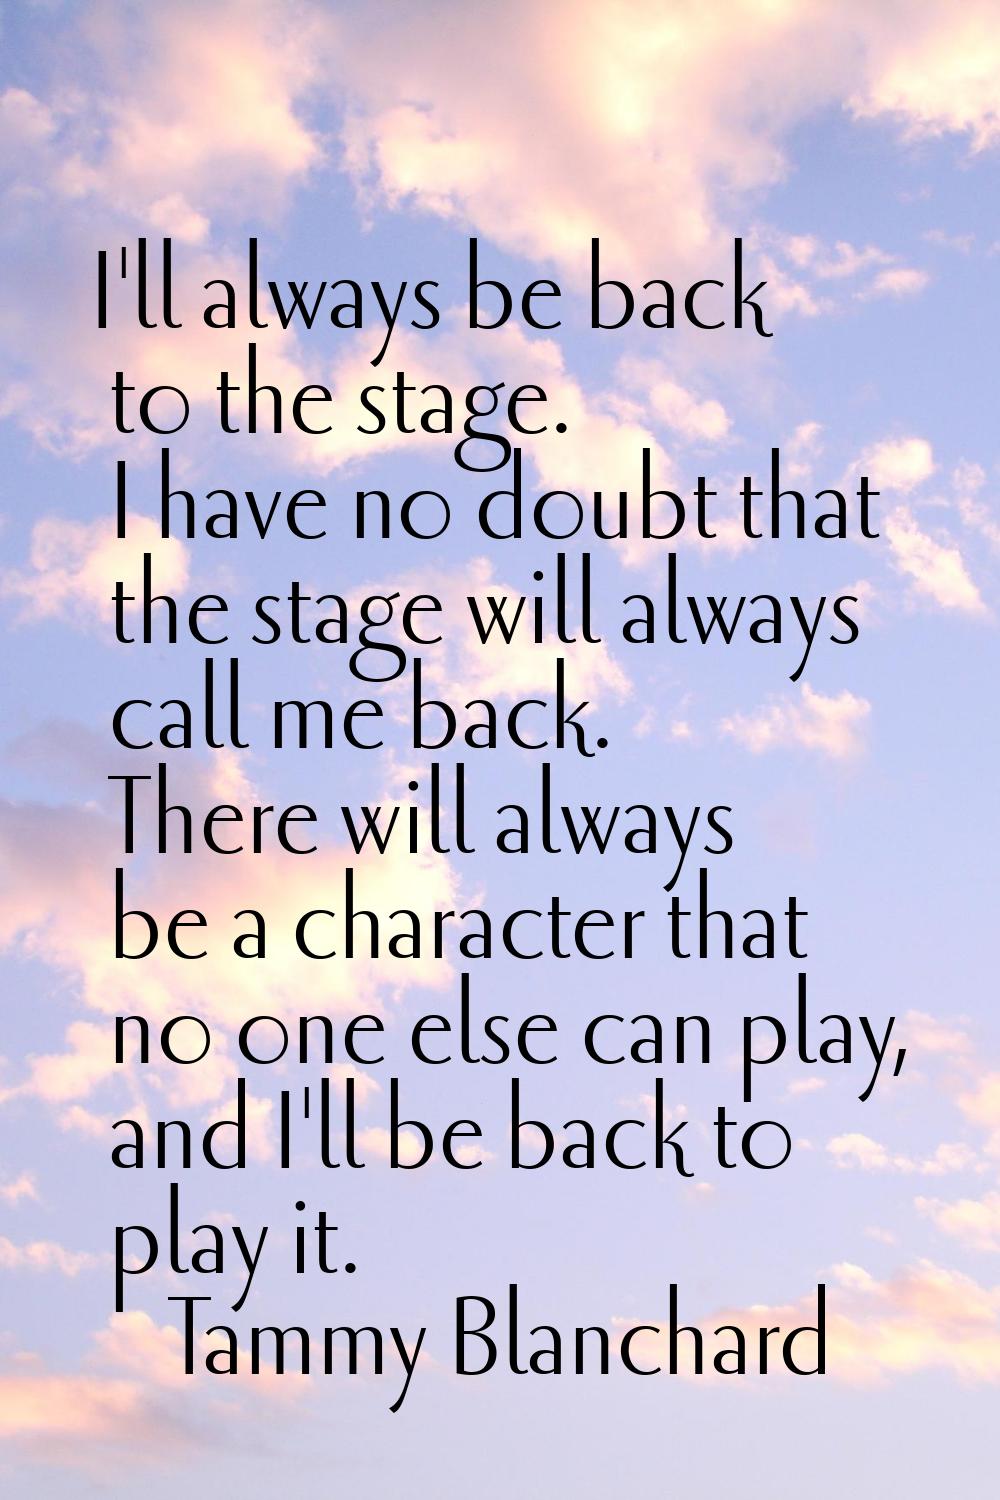 I'll always be back to the stage. I have no doubt that the stage will always call me back. There wi